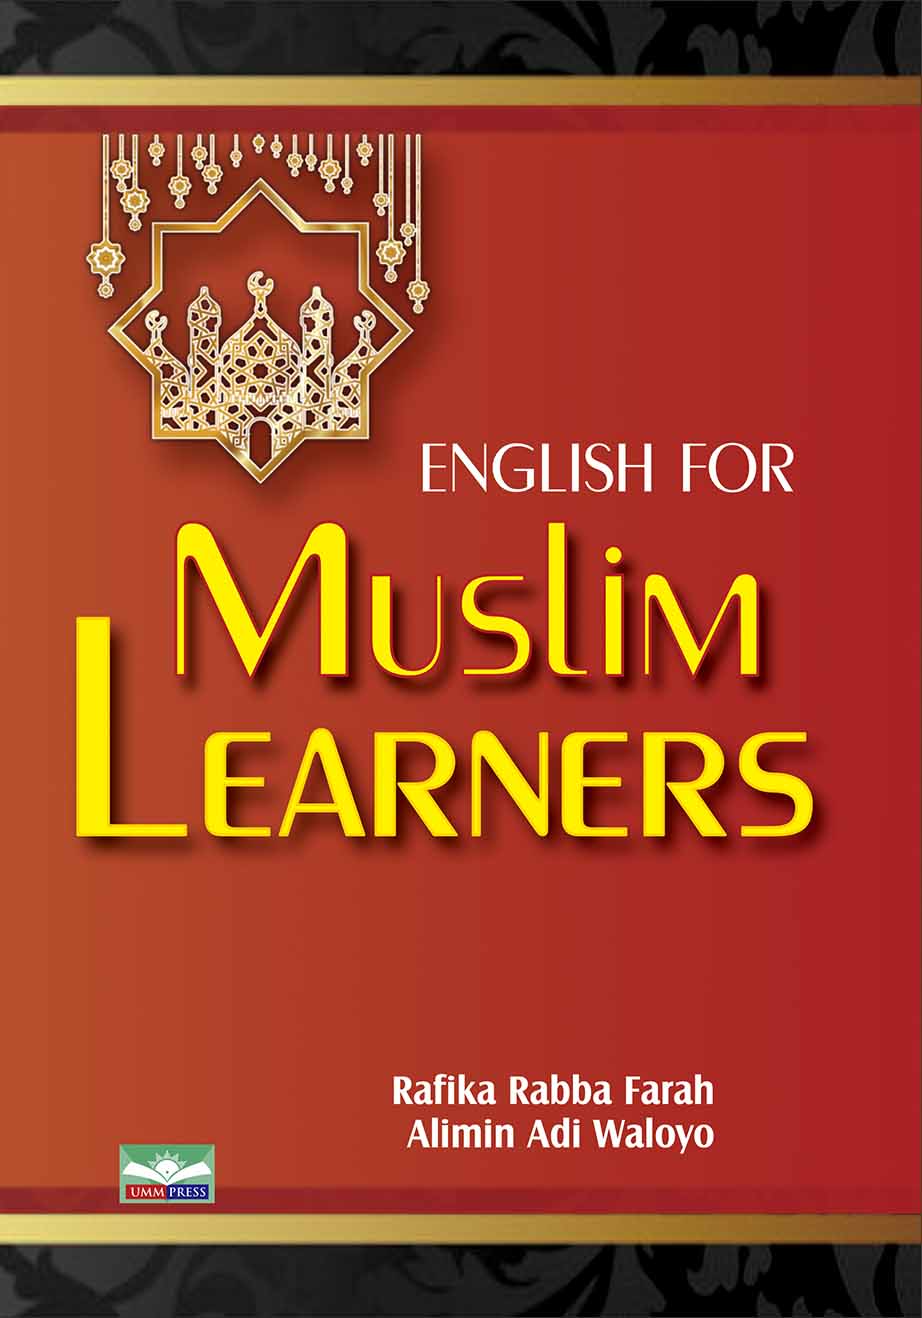 ENGLISH FOR MUSLIM LEARNERS